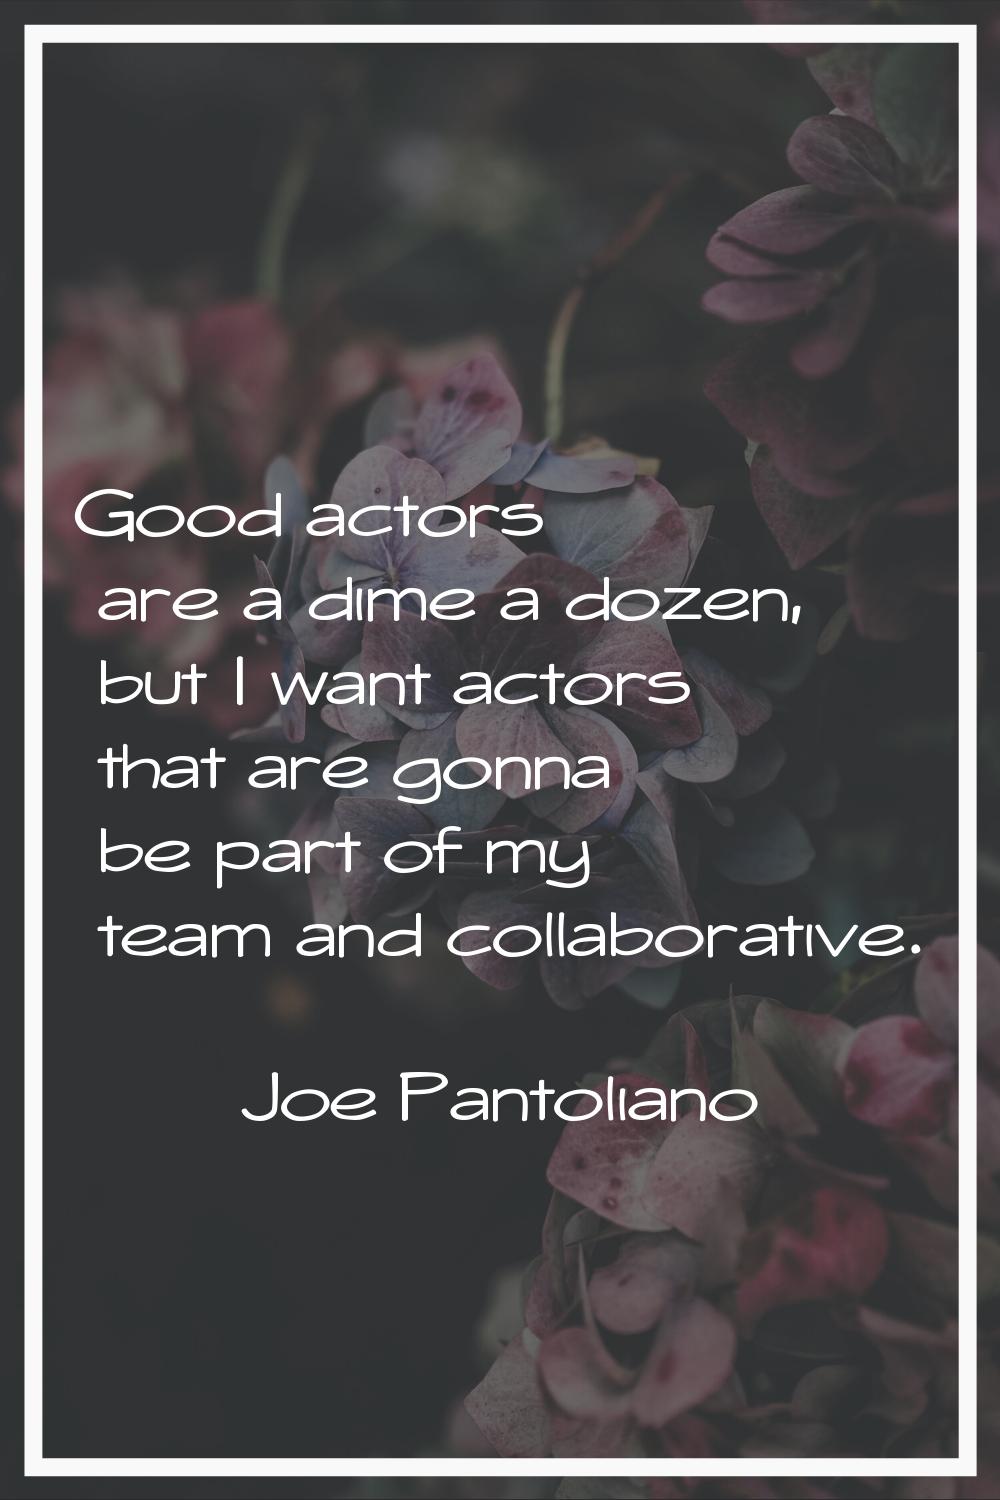 Good actors are a dime a dozen, but I want actors that are gonna be part of my team and collaborati